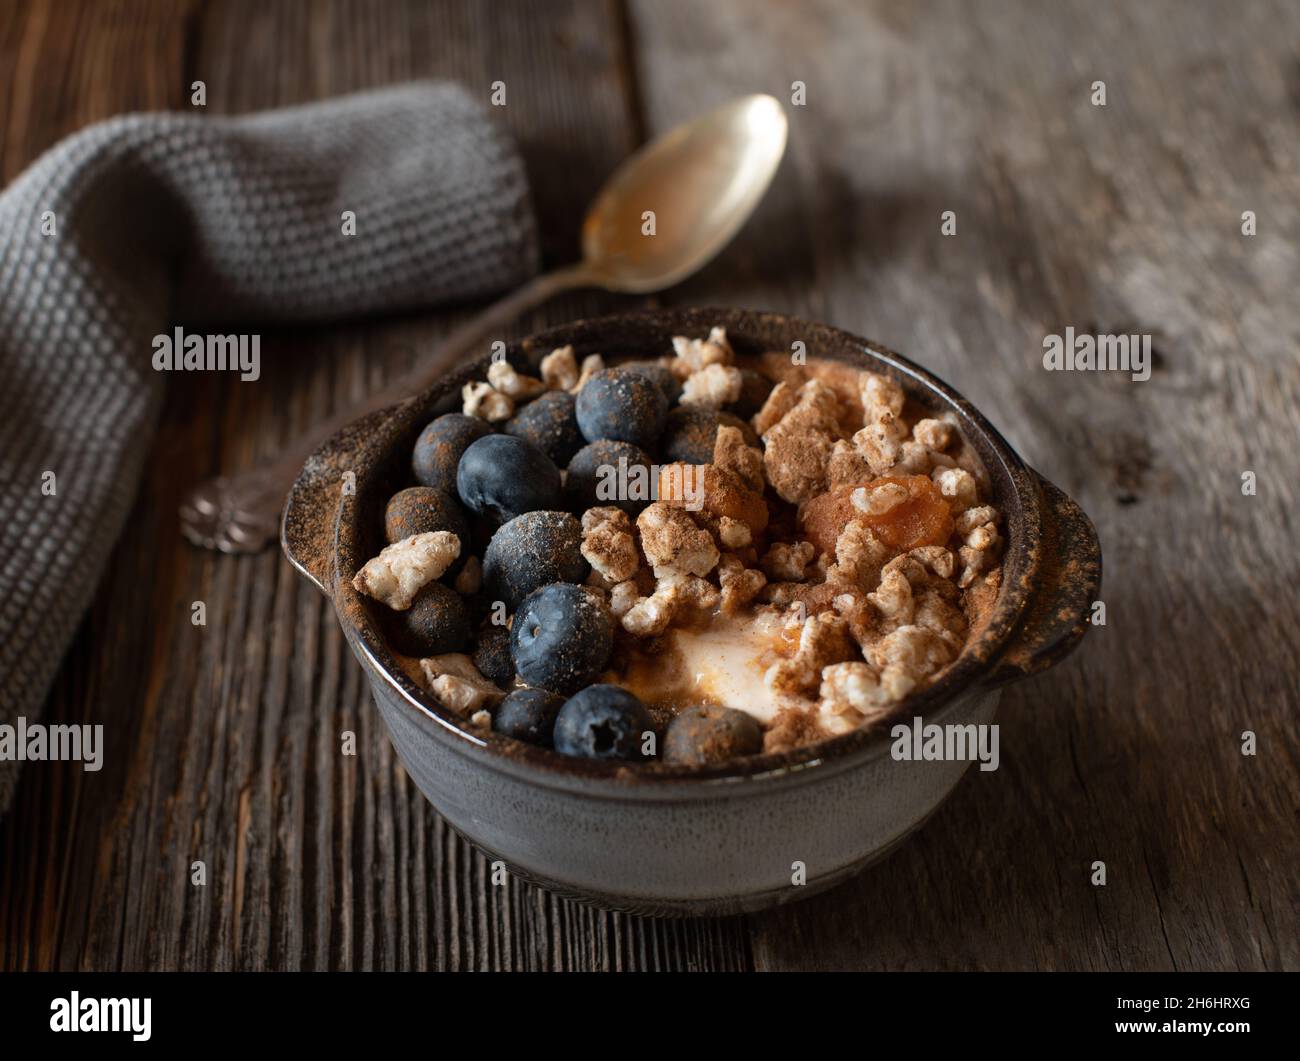 High protein breakfast with greek yogurt, pureed pumpkin, smashed brown rice cakes, blueberries and cinnamon. Served isolated on wooden table. Stock Photo